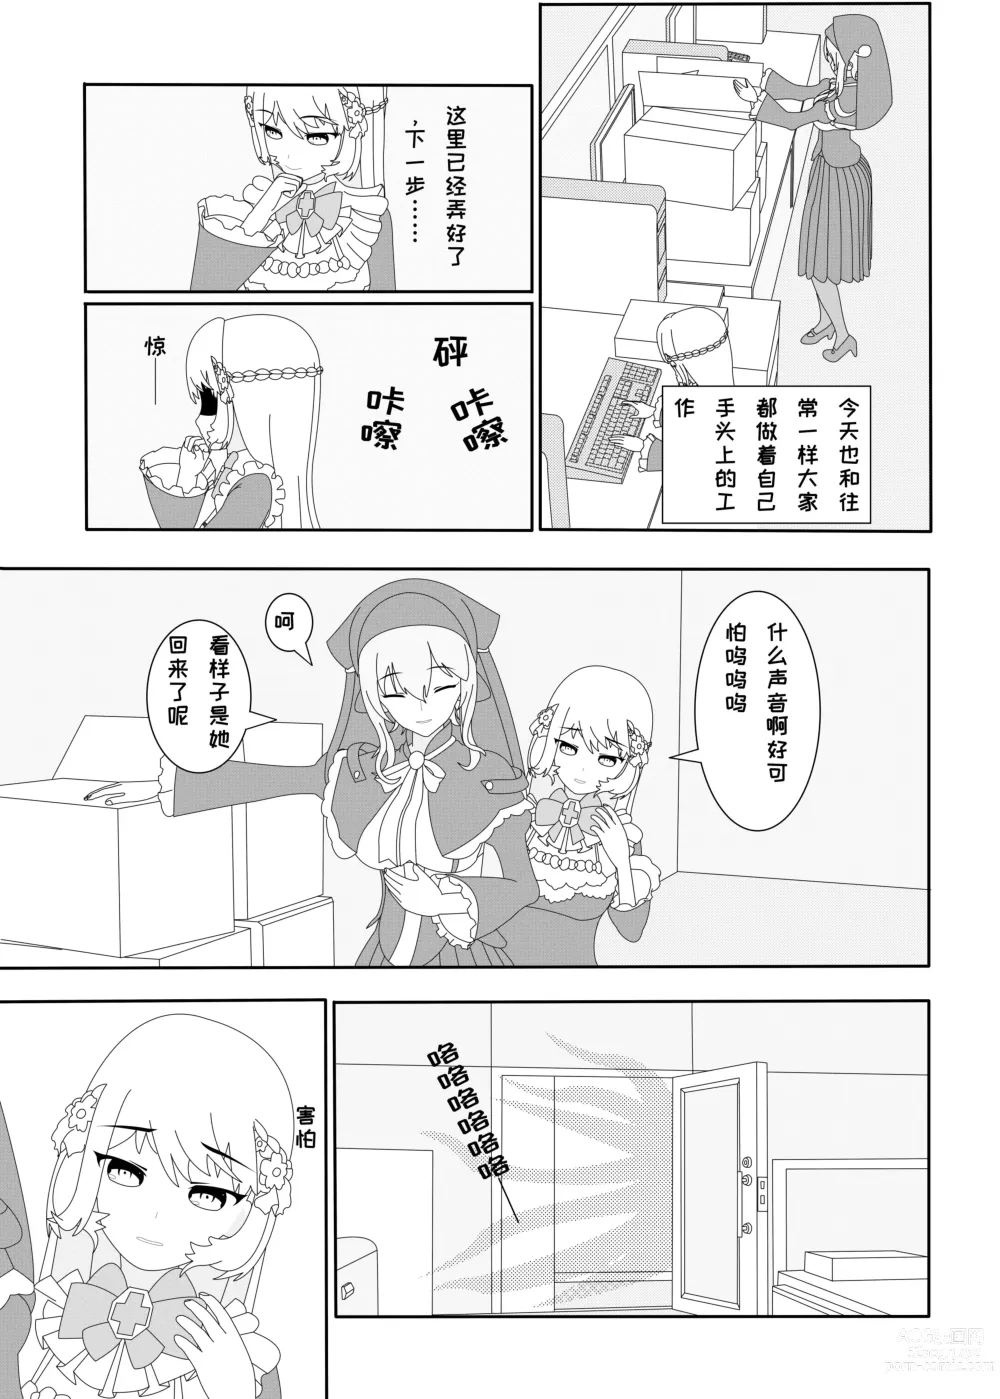 Page 2 of doujinshi 鲸之恋2（西丝特Xether）